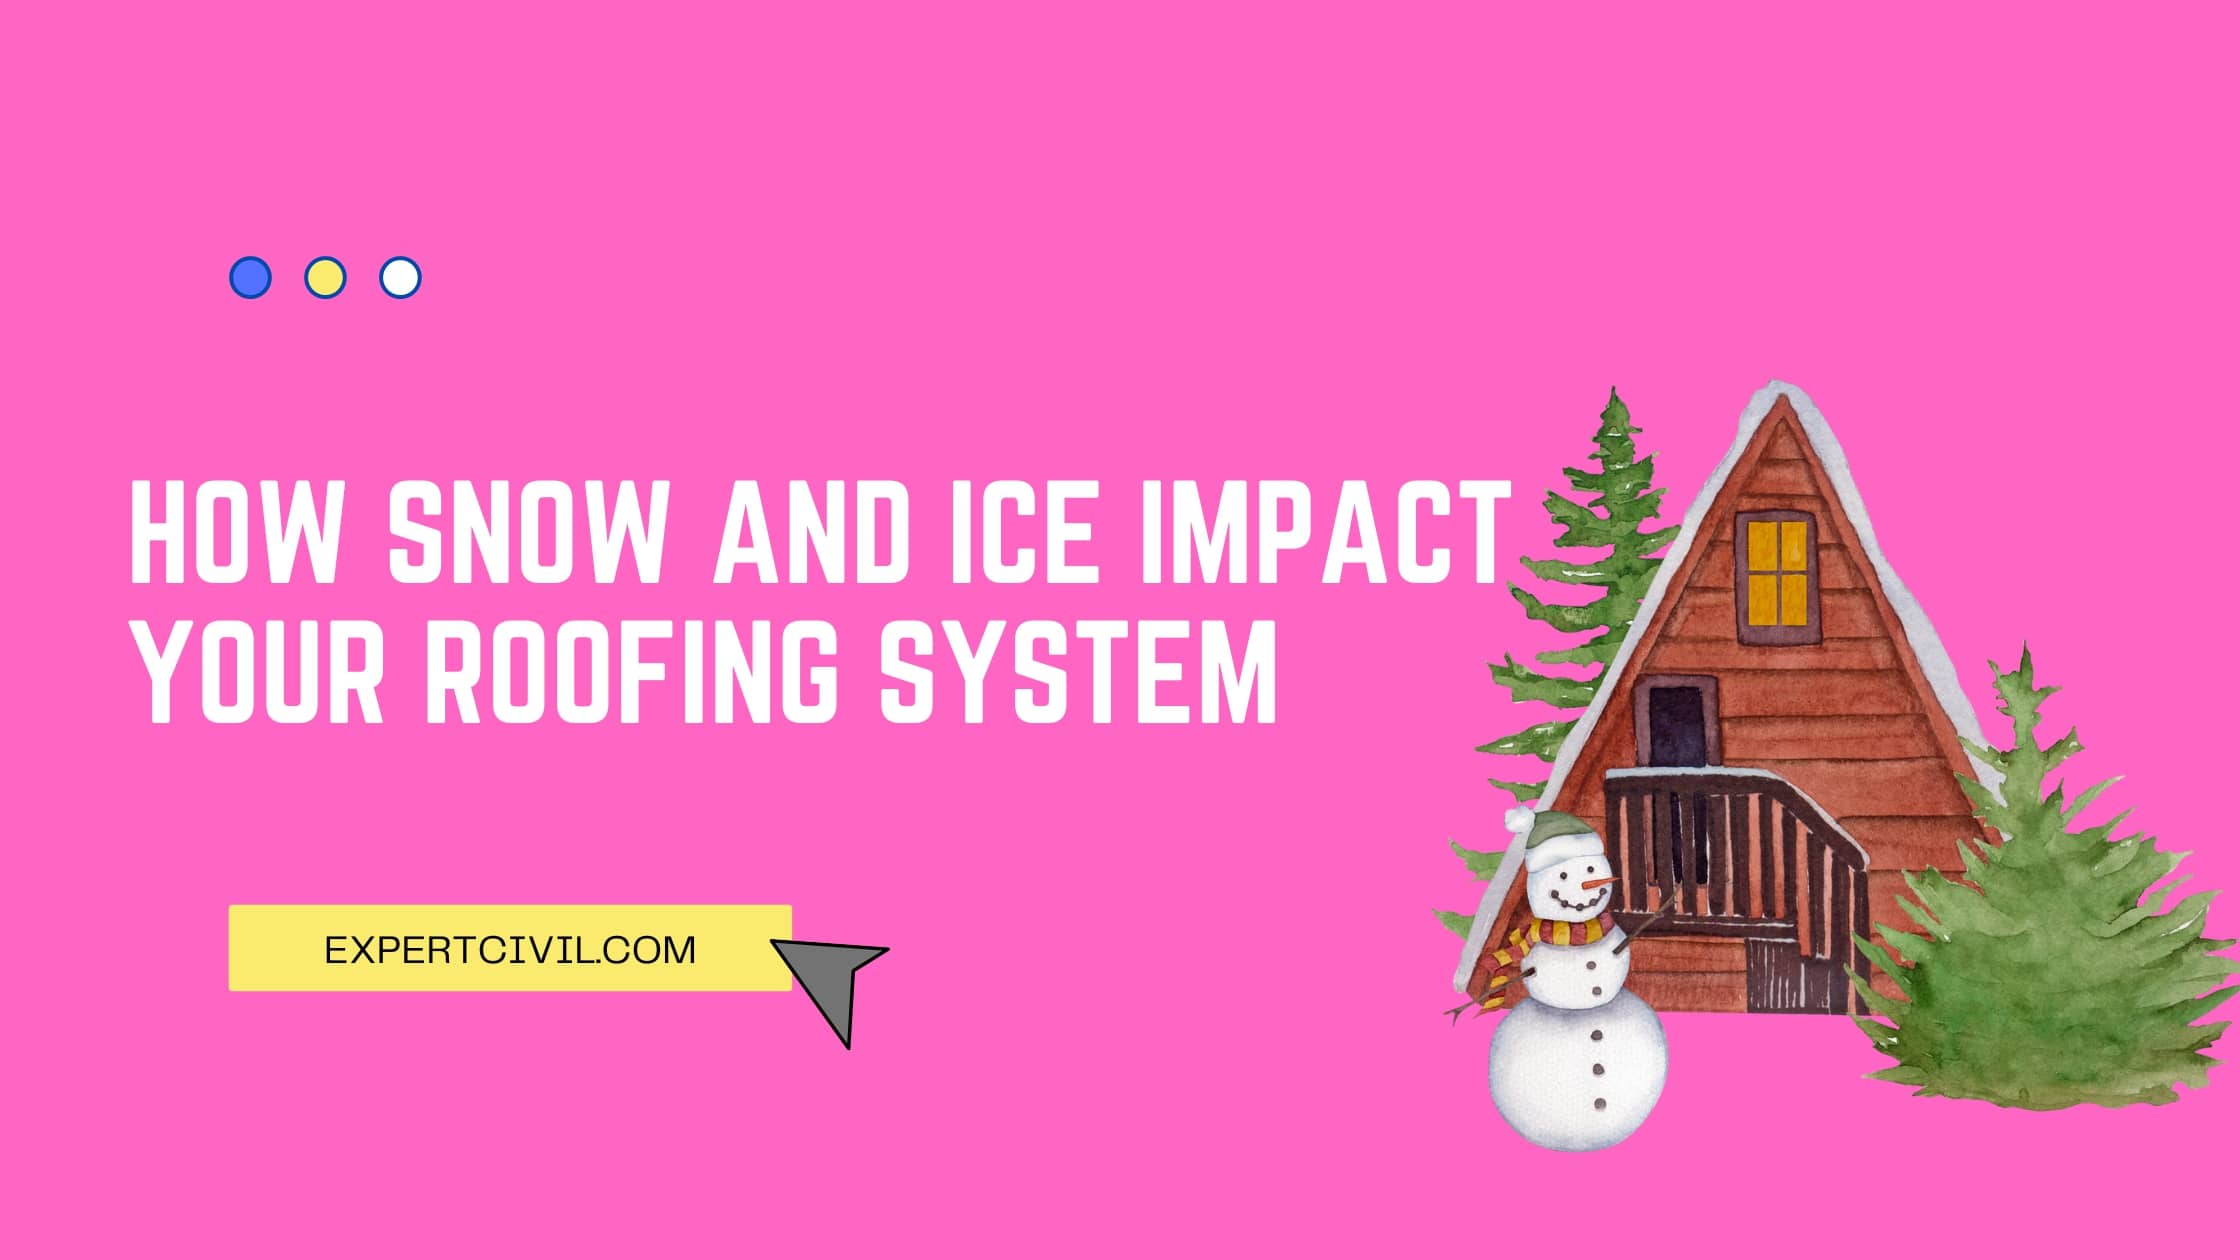 How Snow and Ice Impact Your Roofing System